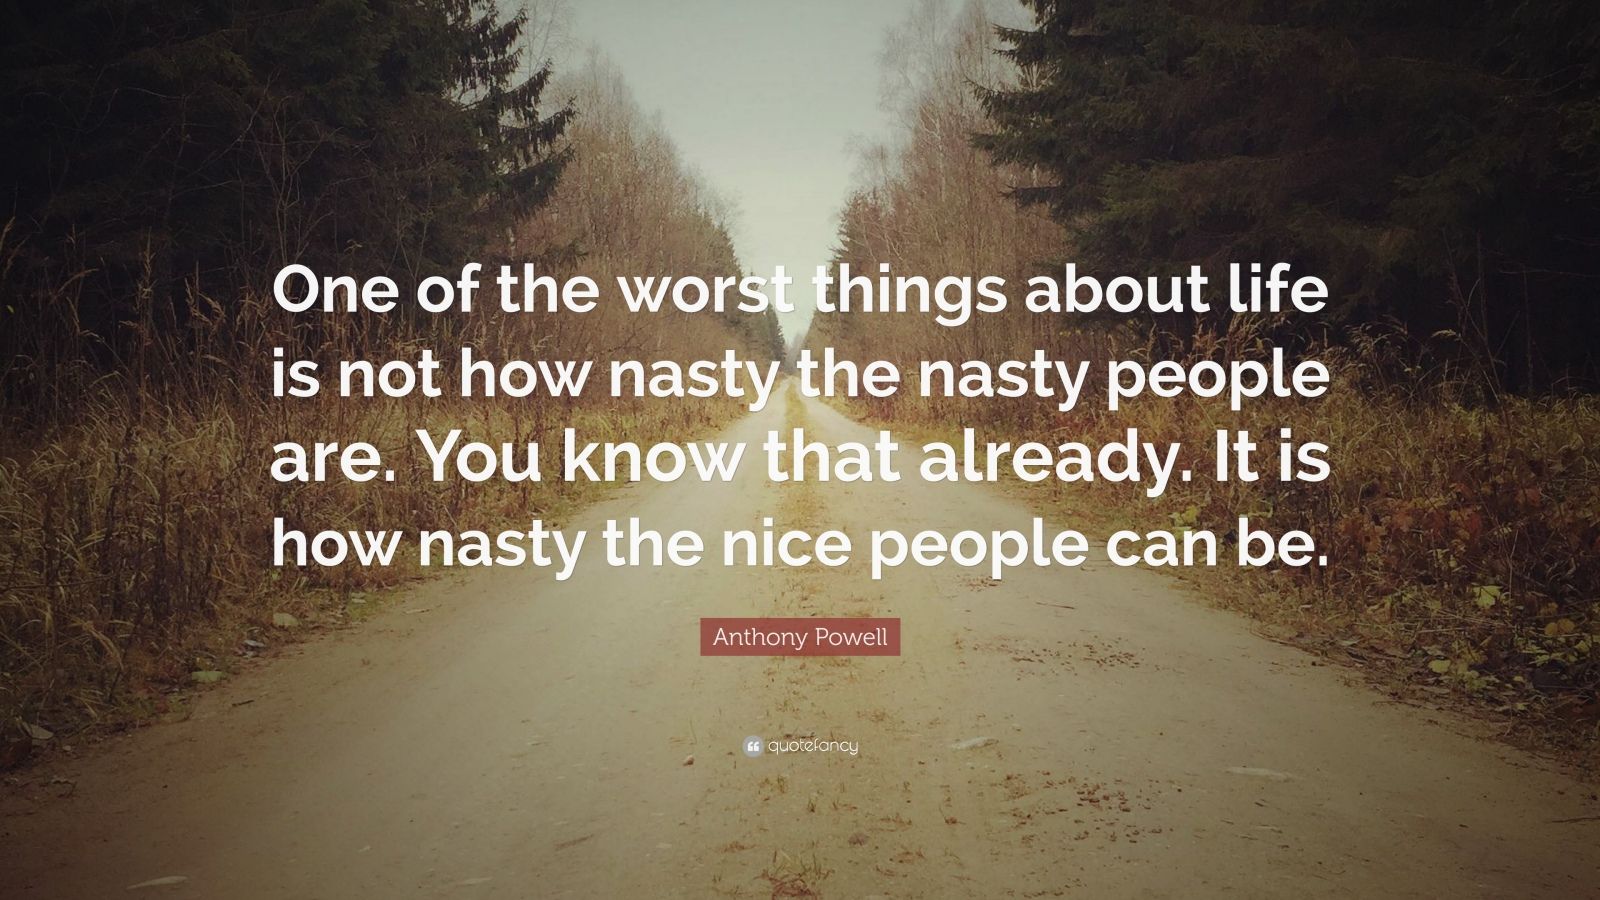 Anthony Powell Quote “one Of The Worst Things About Life Is Not How Nasty The Nasty People Are